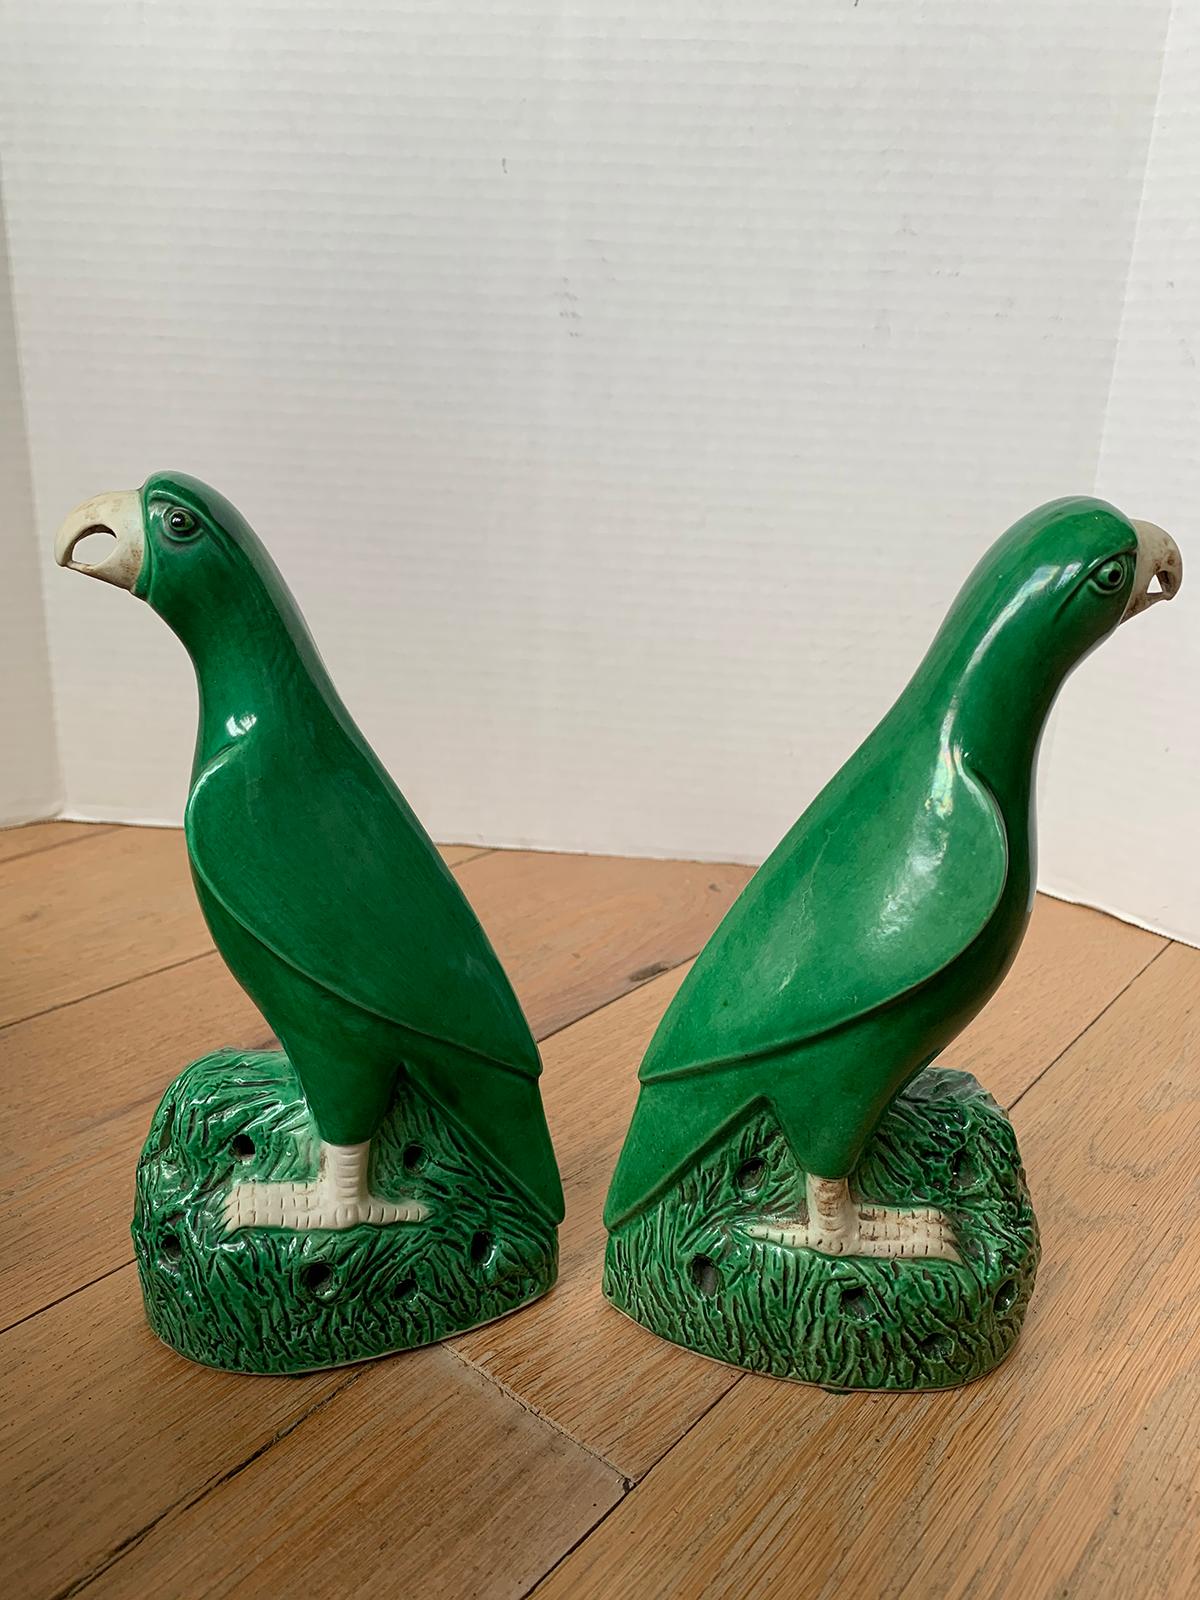 Pair of 19th Century Chinese Export Green Glazed Porcelain Parrots, Unmarked For Sale 1